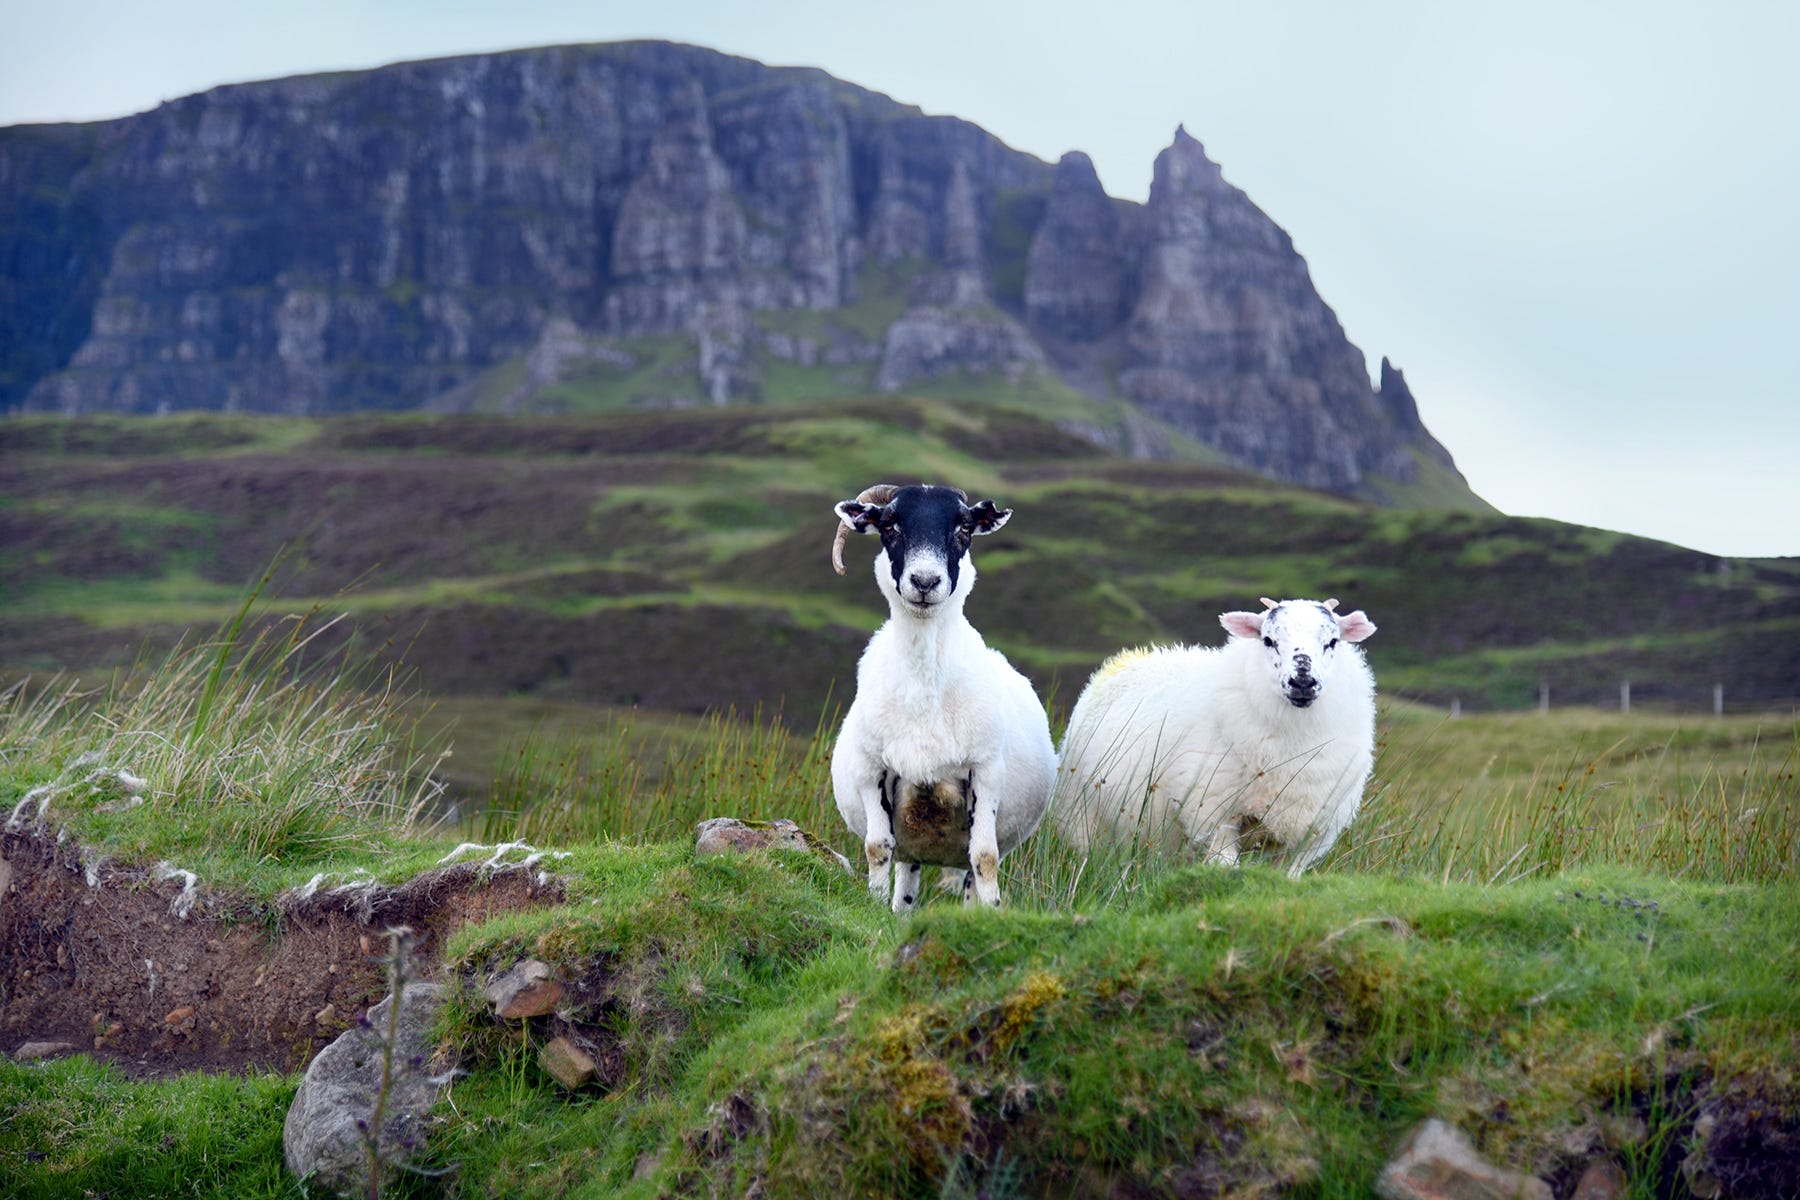 Scotland Isle Of Skye Is Home To Dramatic Scenery Cliffs And Castles